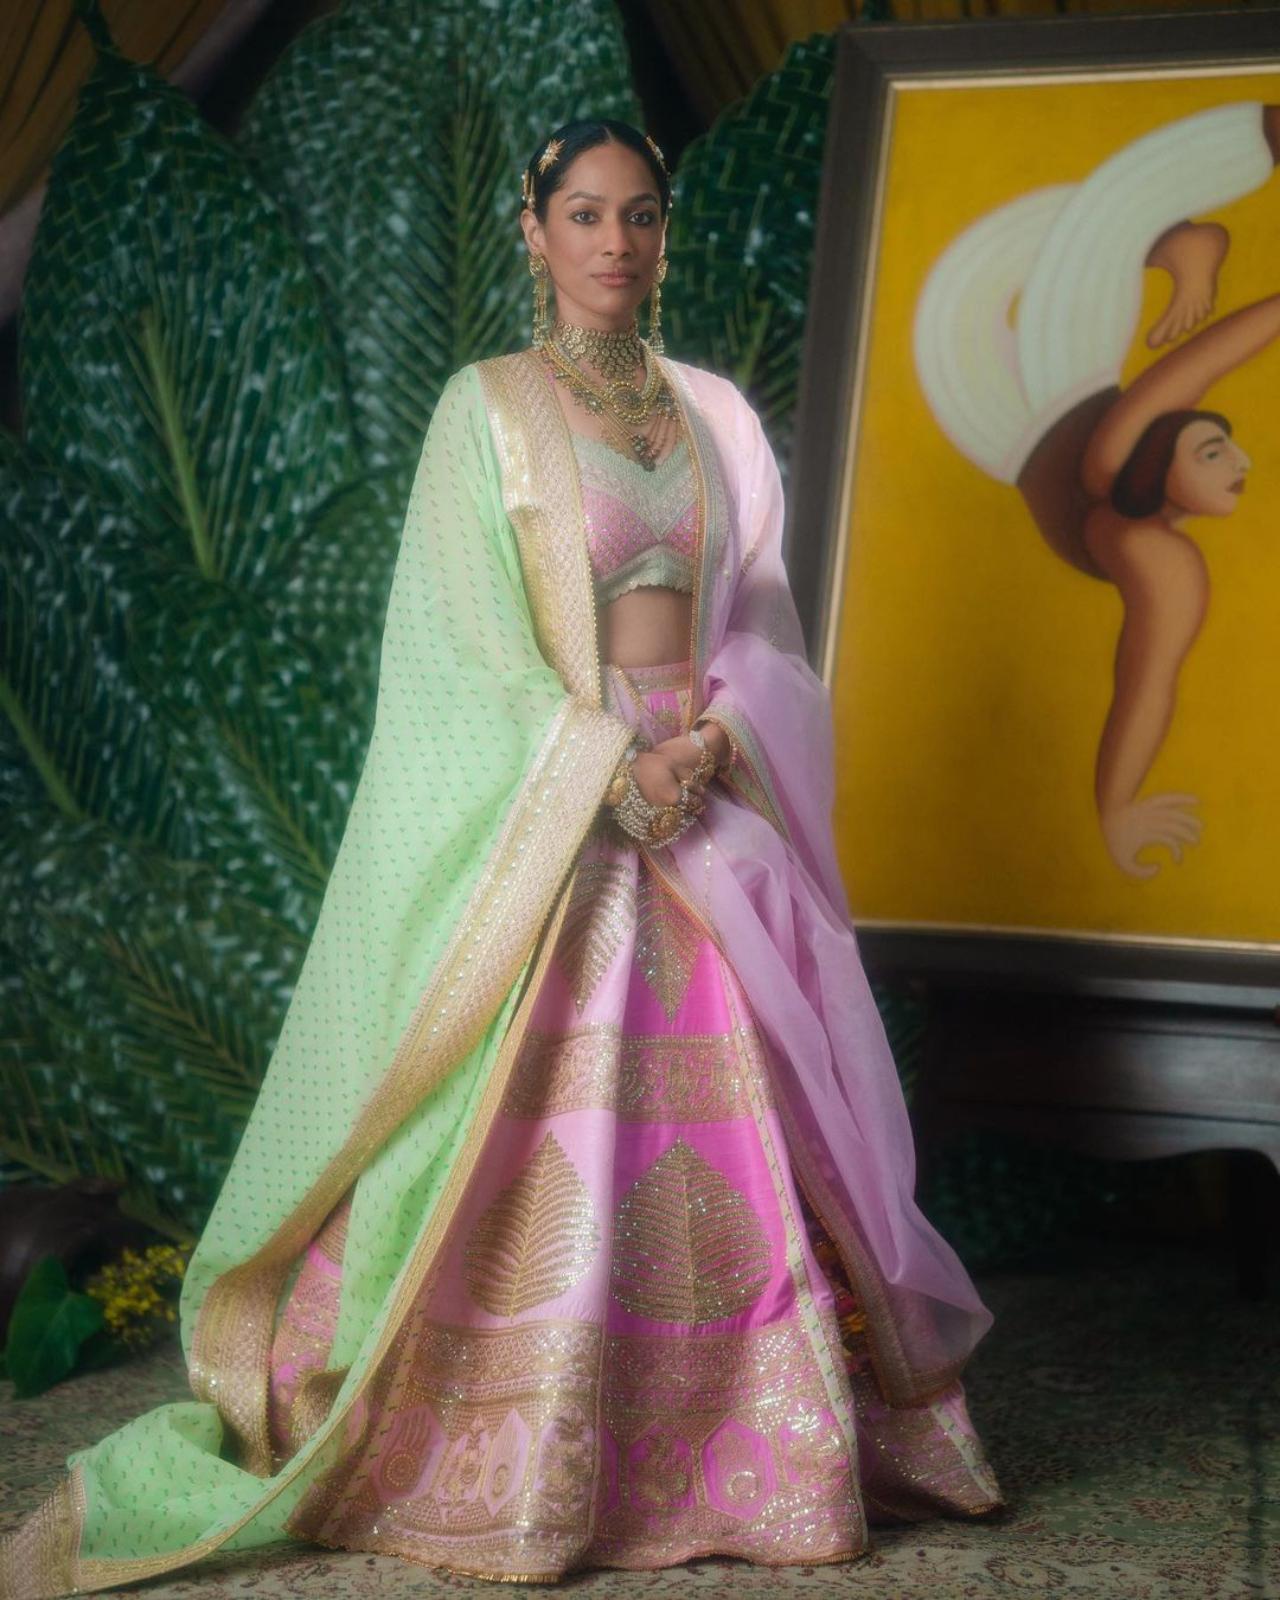 Masaba and Satyadeep twinned in shades of pink for the wedding. Masaba looked ethereal in a barfi pink raw silk lehenga with gold embroidery and a lime green dupatta with a wallflower print on it. Satyadeep opted for a barfi pink wallflower bandi and a comfortable kurta-pyjama. Both of them wore outfits from House of Masaba's bridal collection